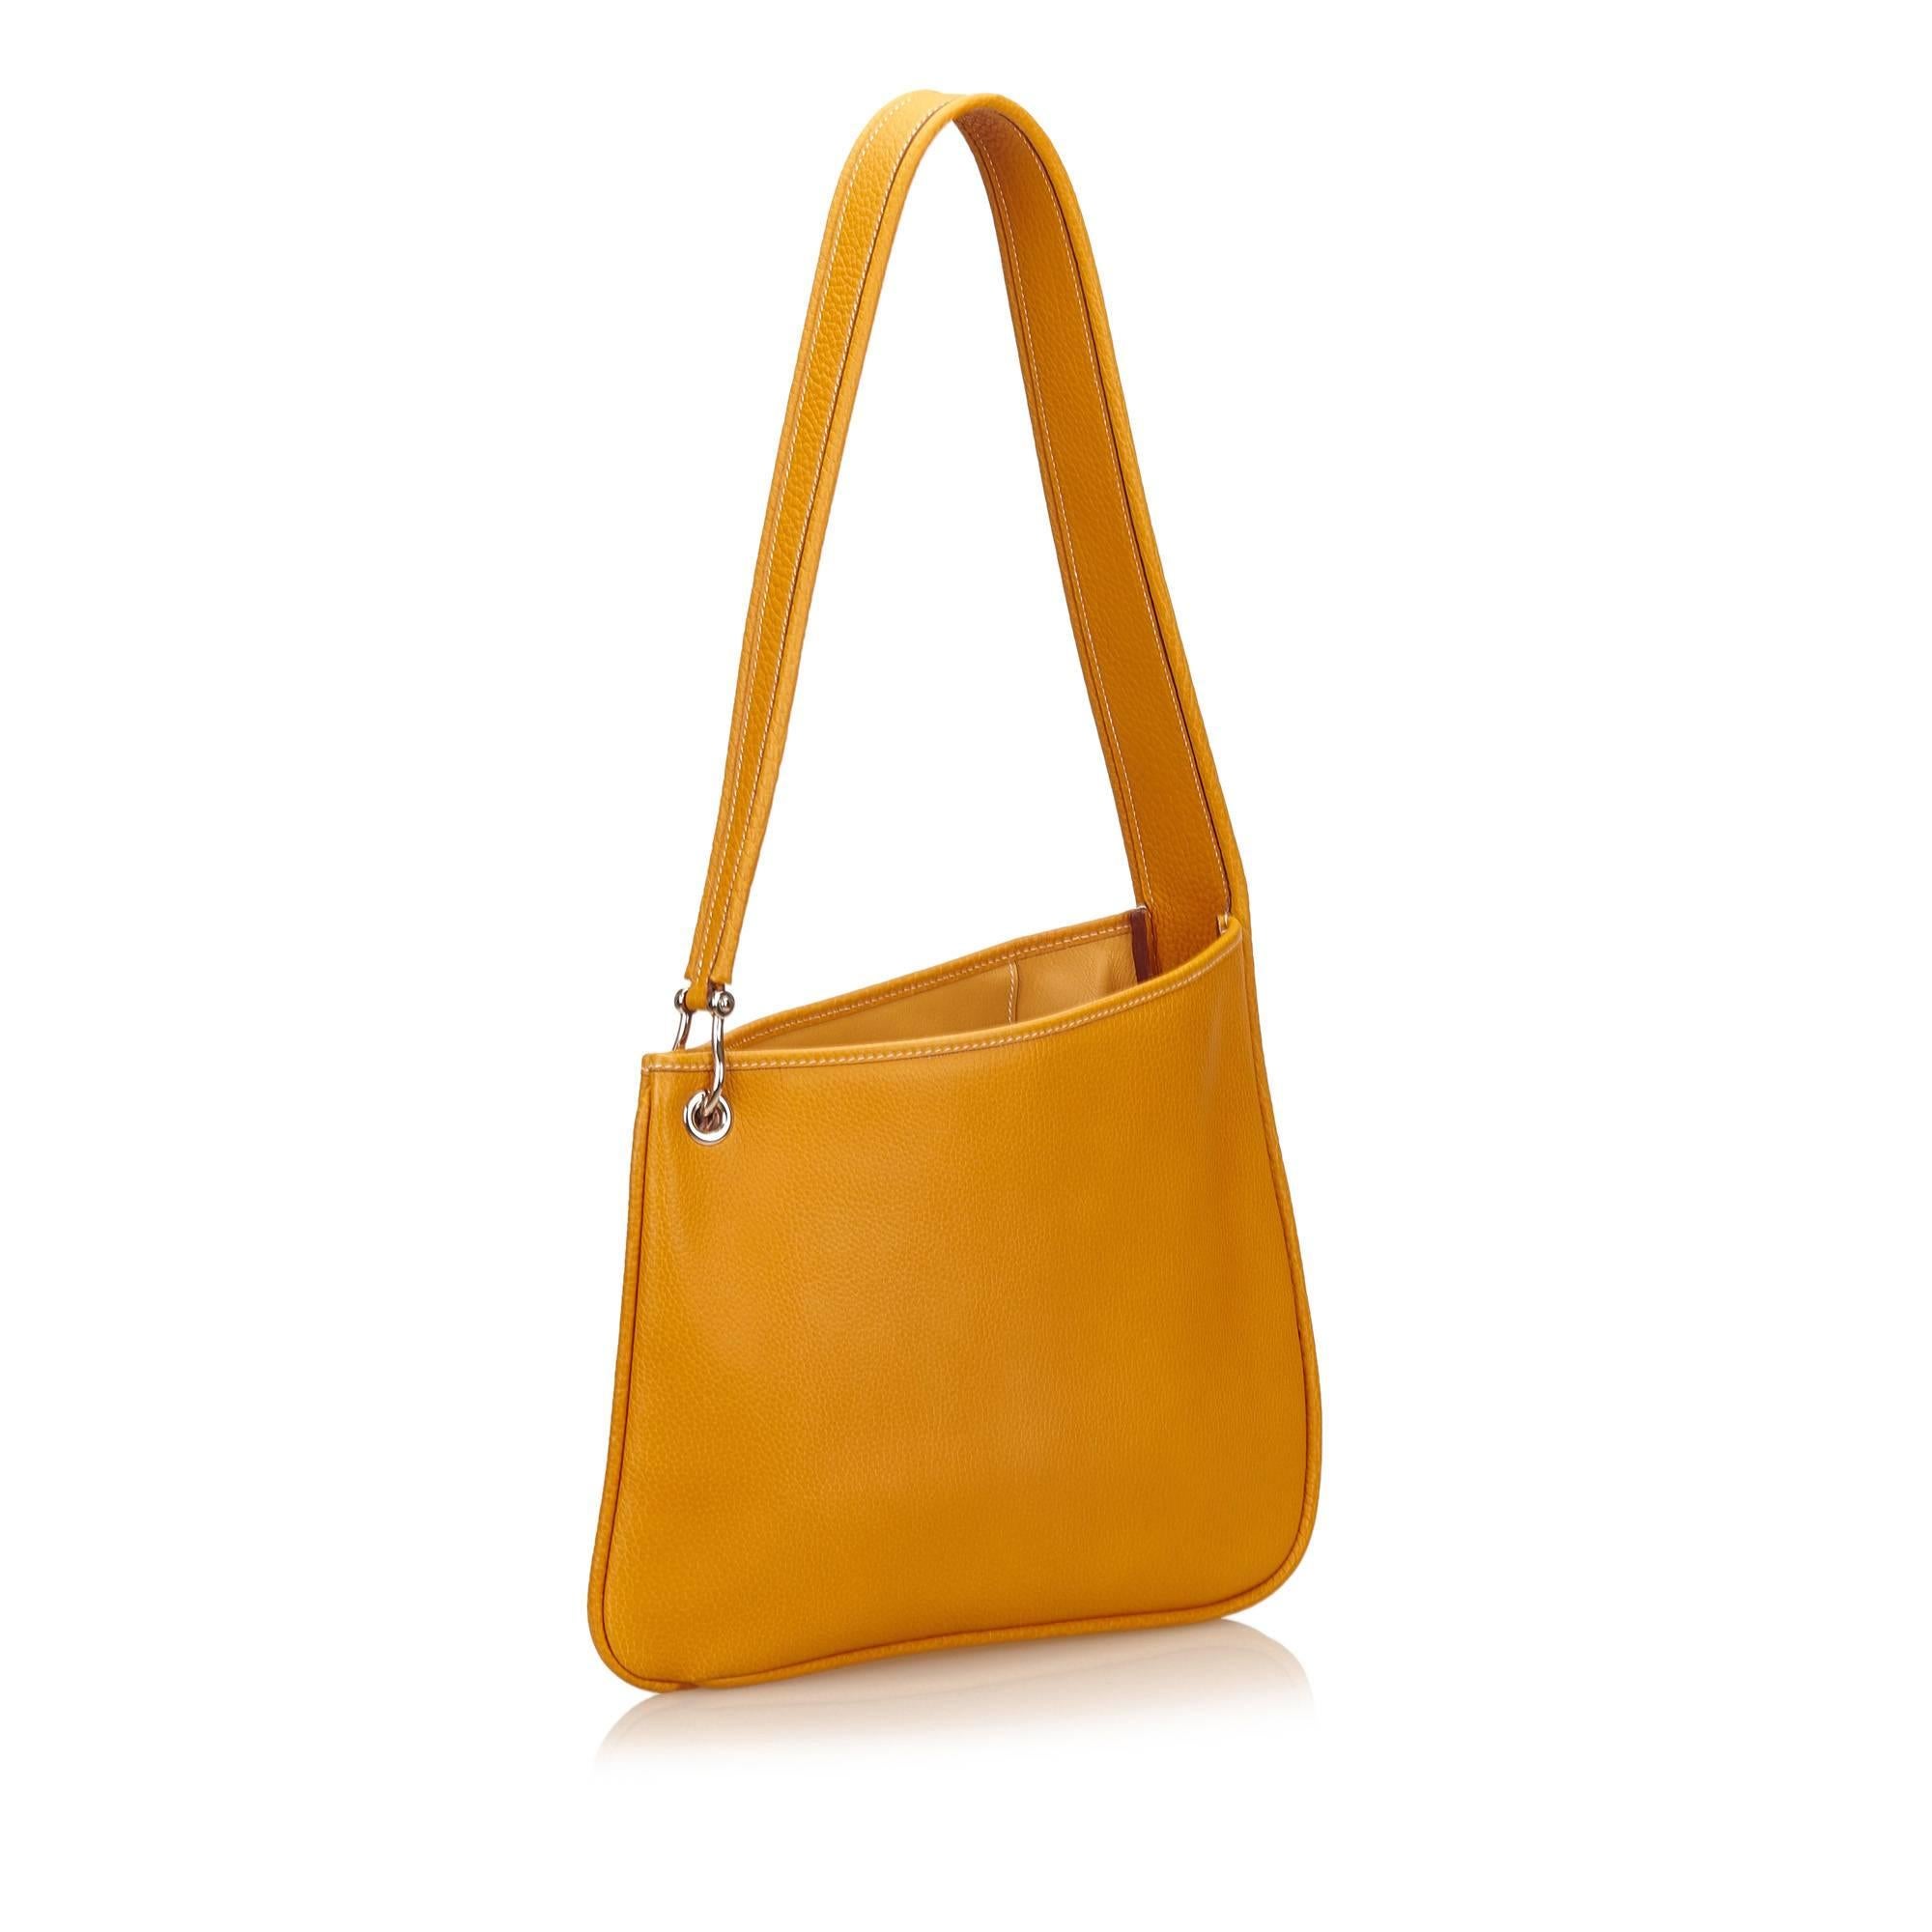 This shoulder bag features an Fjord leather body, flat leather strap, open top, and interior zip and slip pocket.